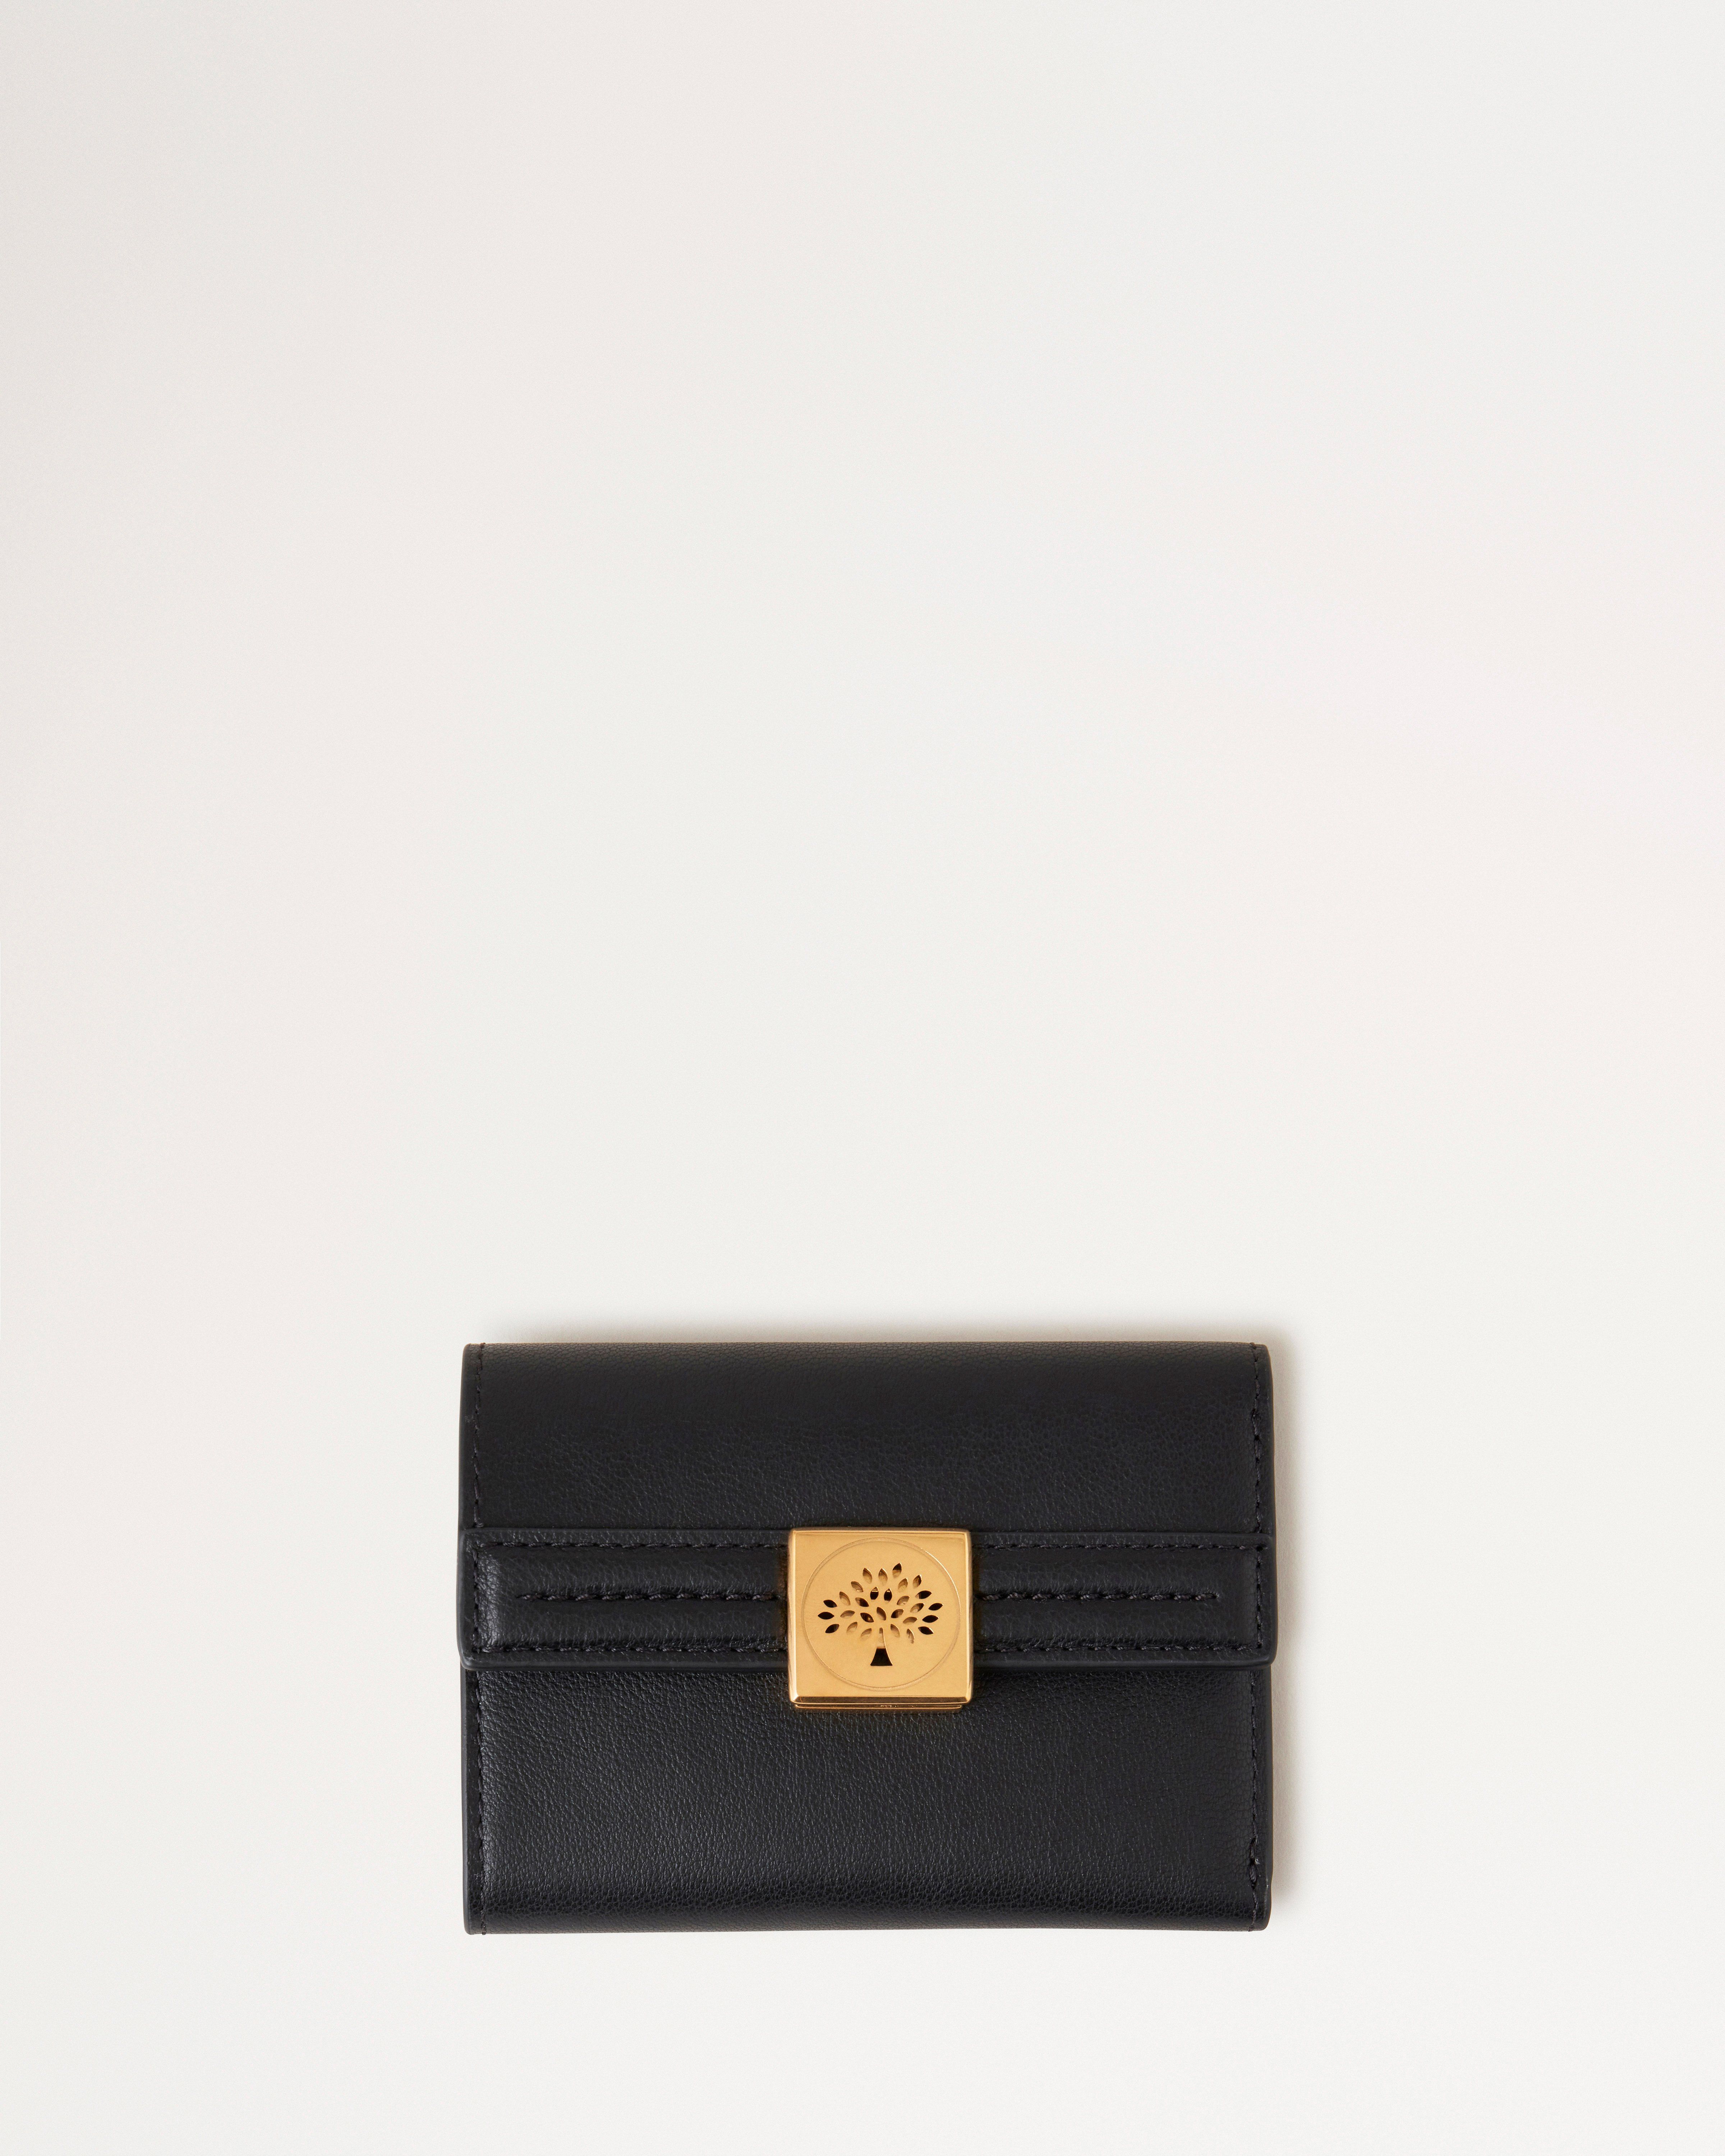 All Wallets and Small Leather Goods For Women